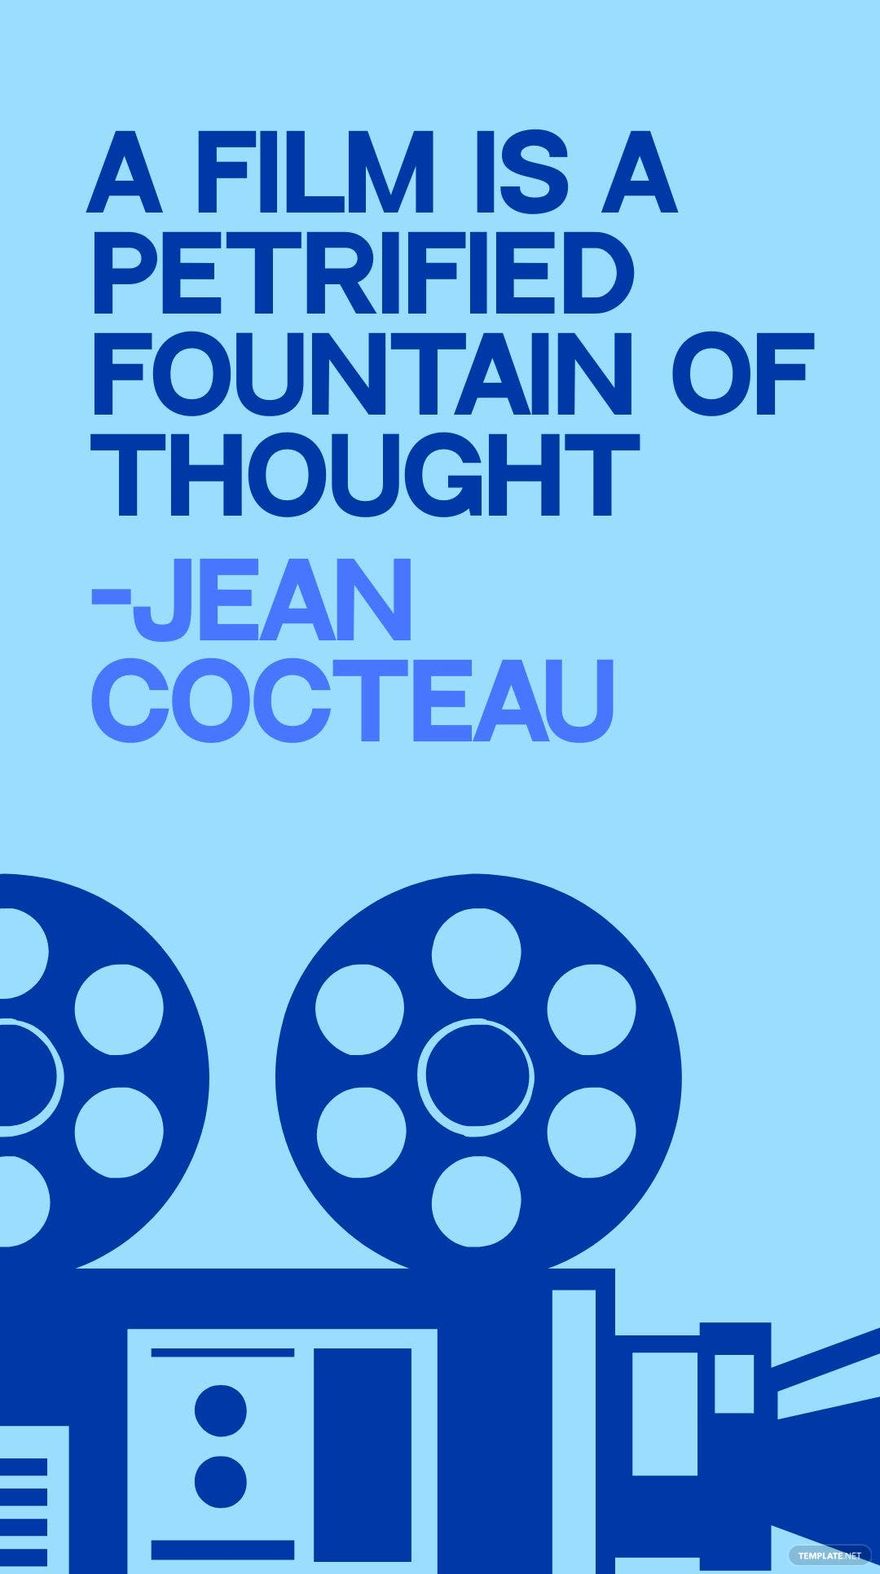 Free Jean Cocteau - A film is a petrified fountain of thought in JPG